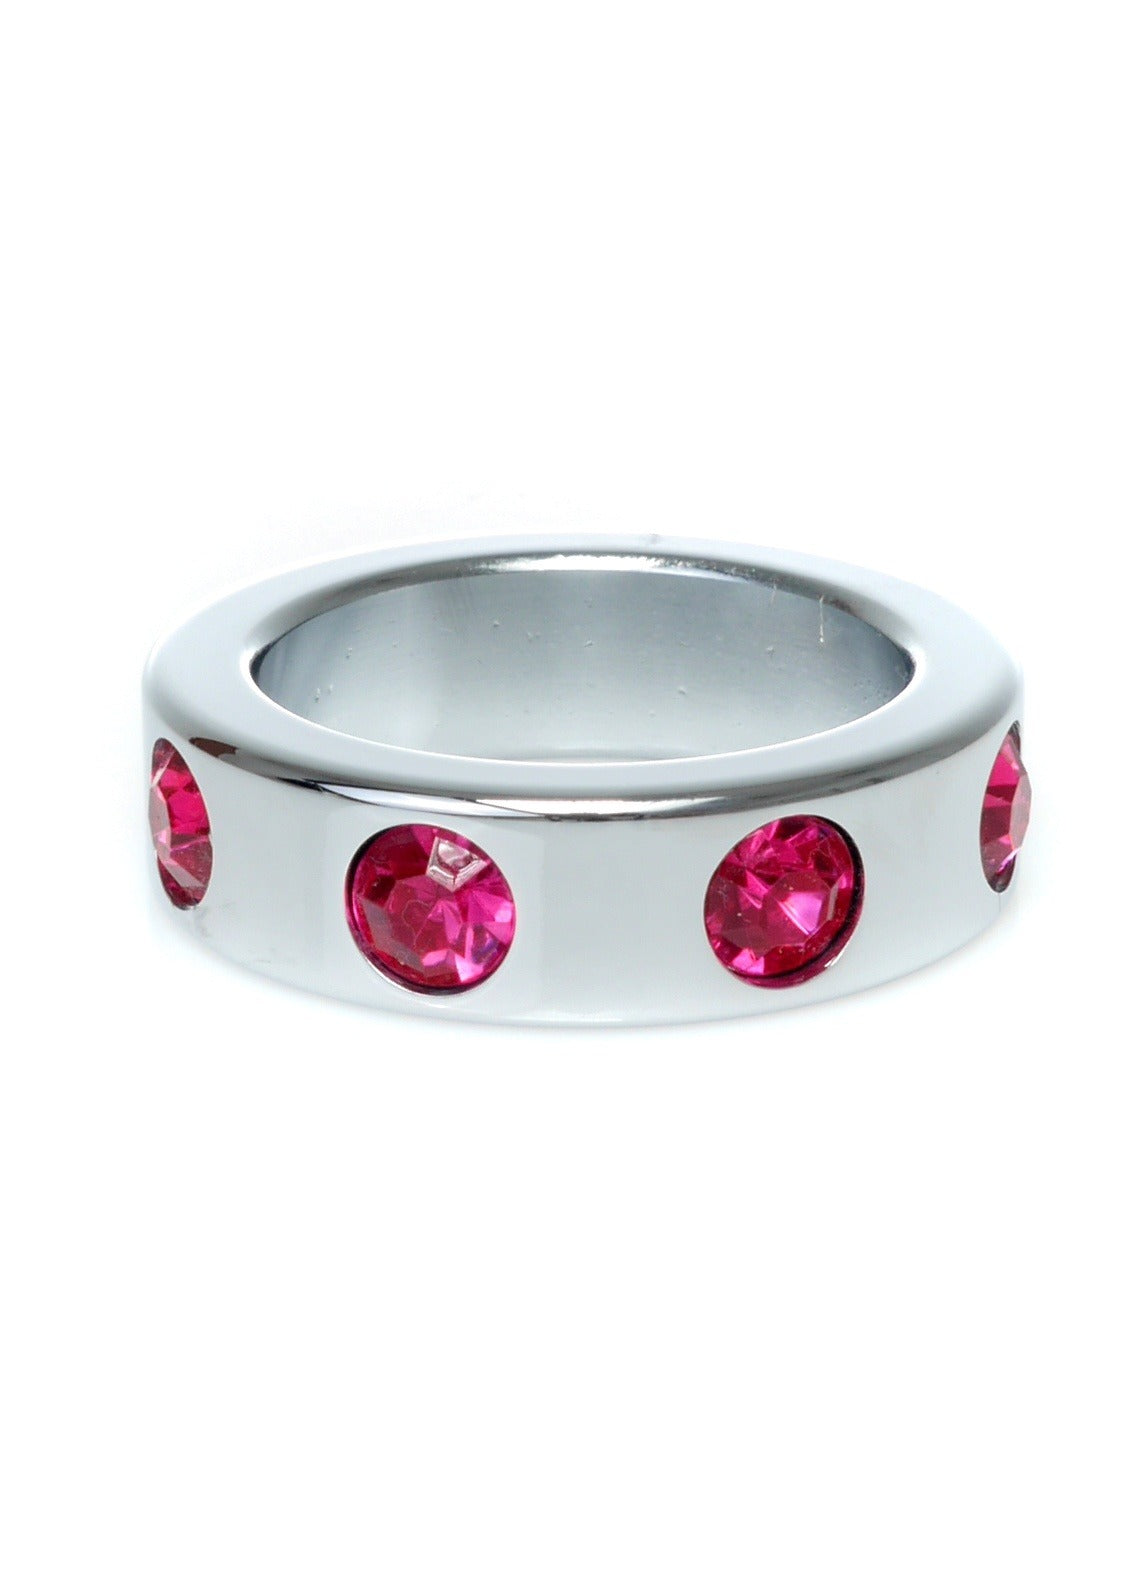 Bossoftoys - 64-00119 - Stainless steel - Metal Cockring - with Pink Diamond stones - Medium size - inner dia 3,5 CM - outer dia 4,5 CM